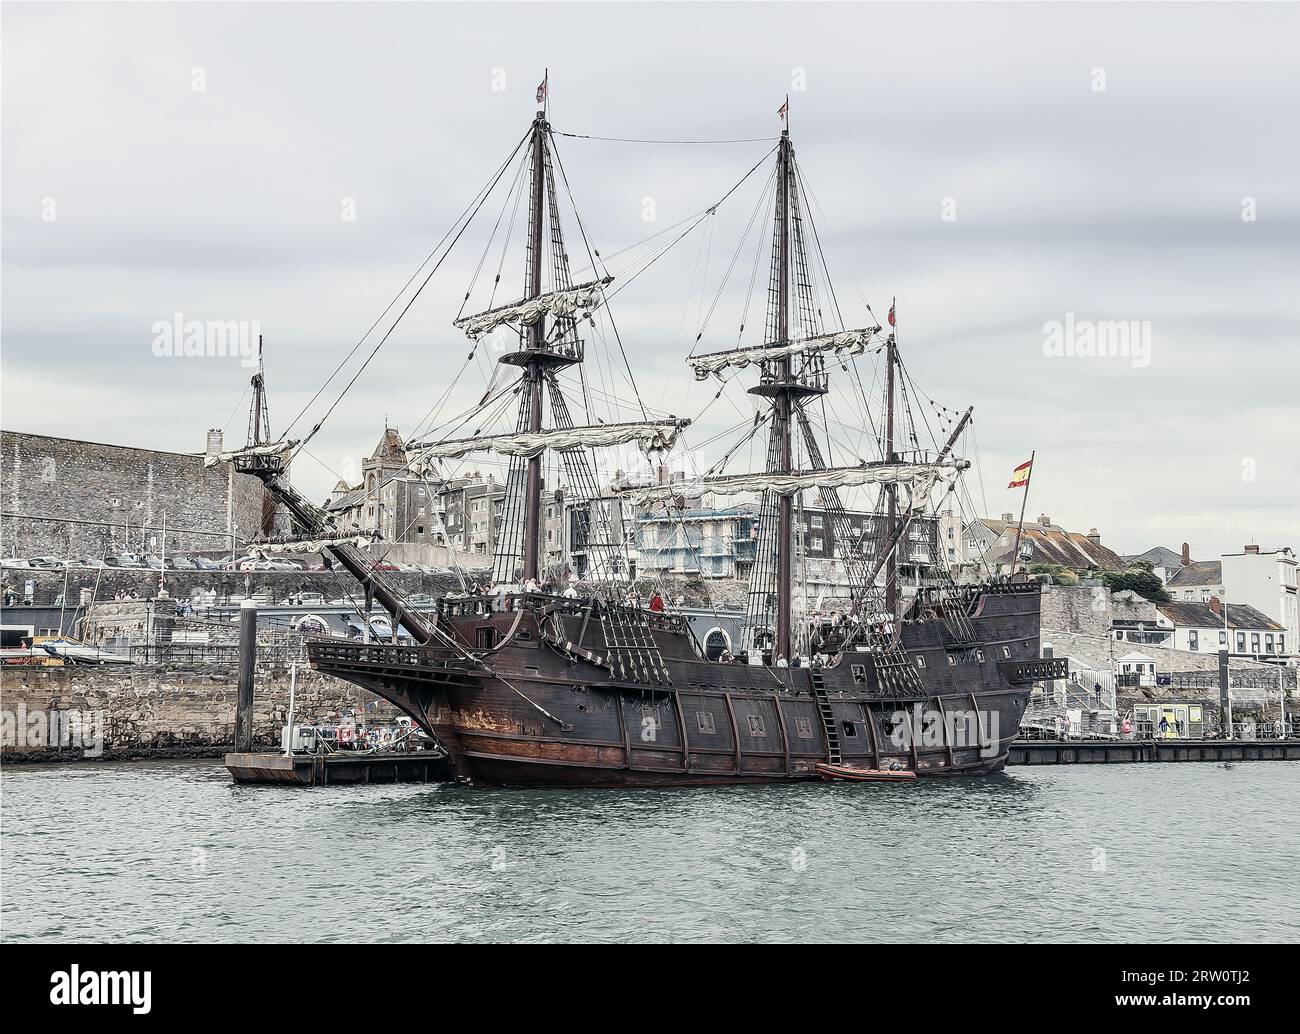 Phoro illustration of the El Galeon berthed at the Barbican Pontoon in Plymouth, with pale washed out colour. The full size replica of a 17th century Stock Photo